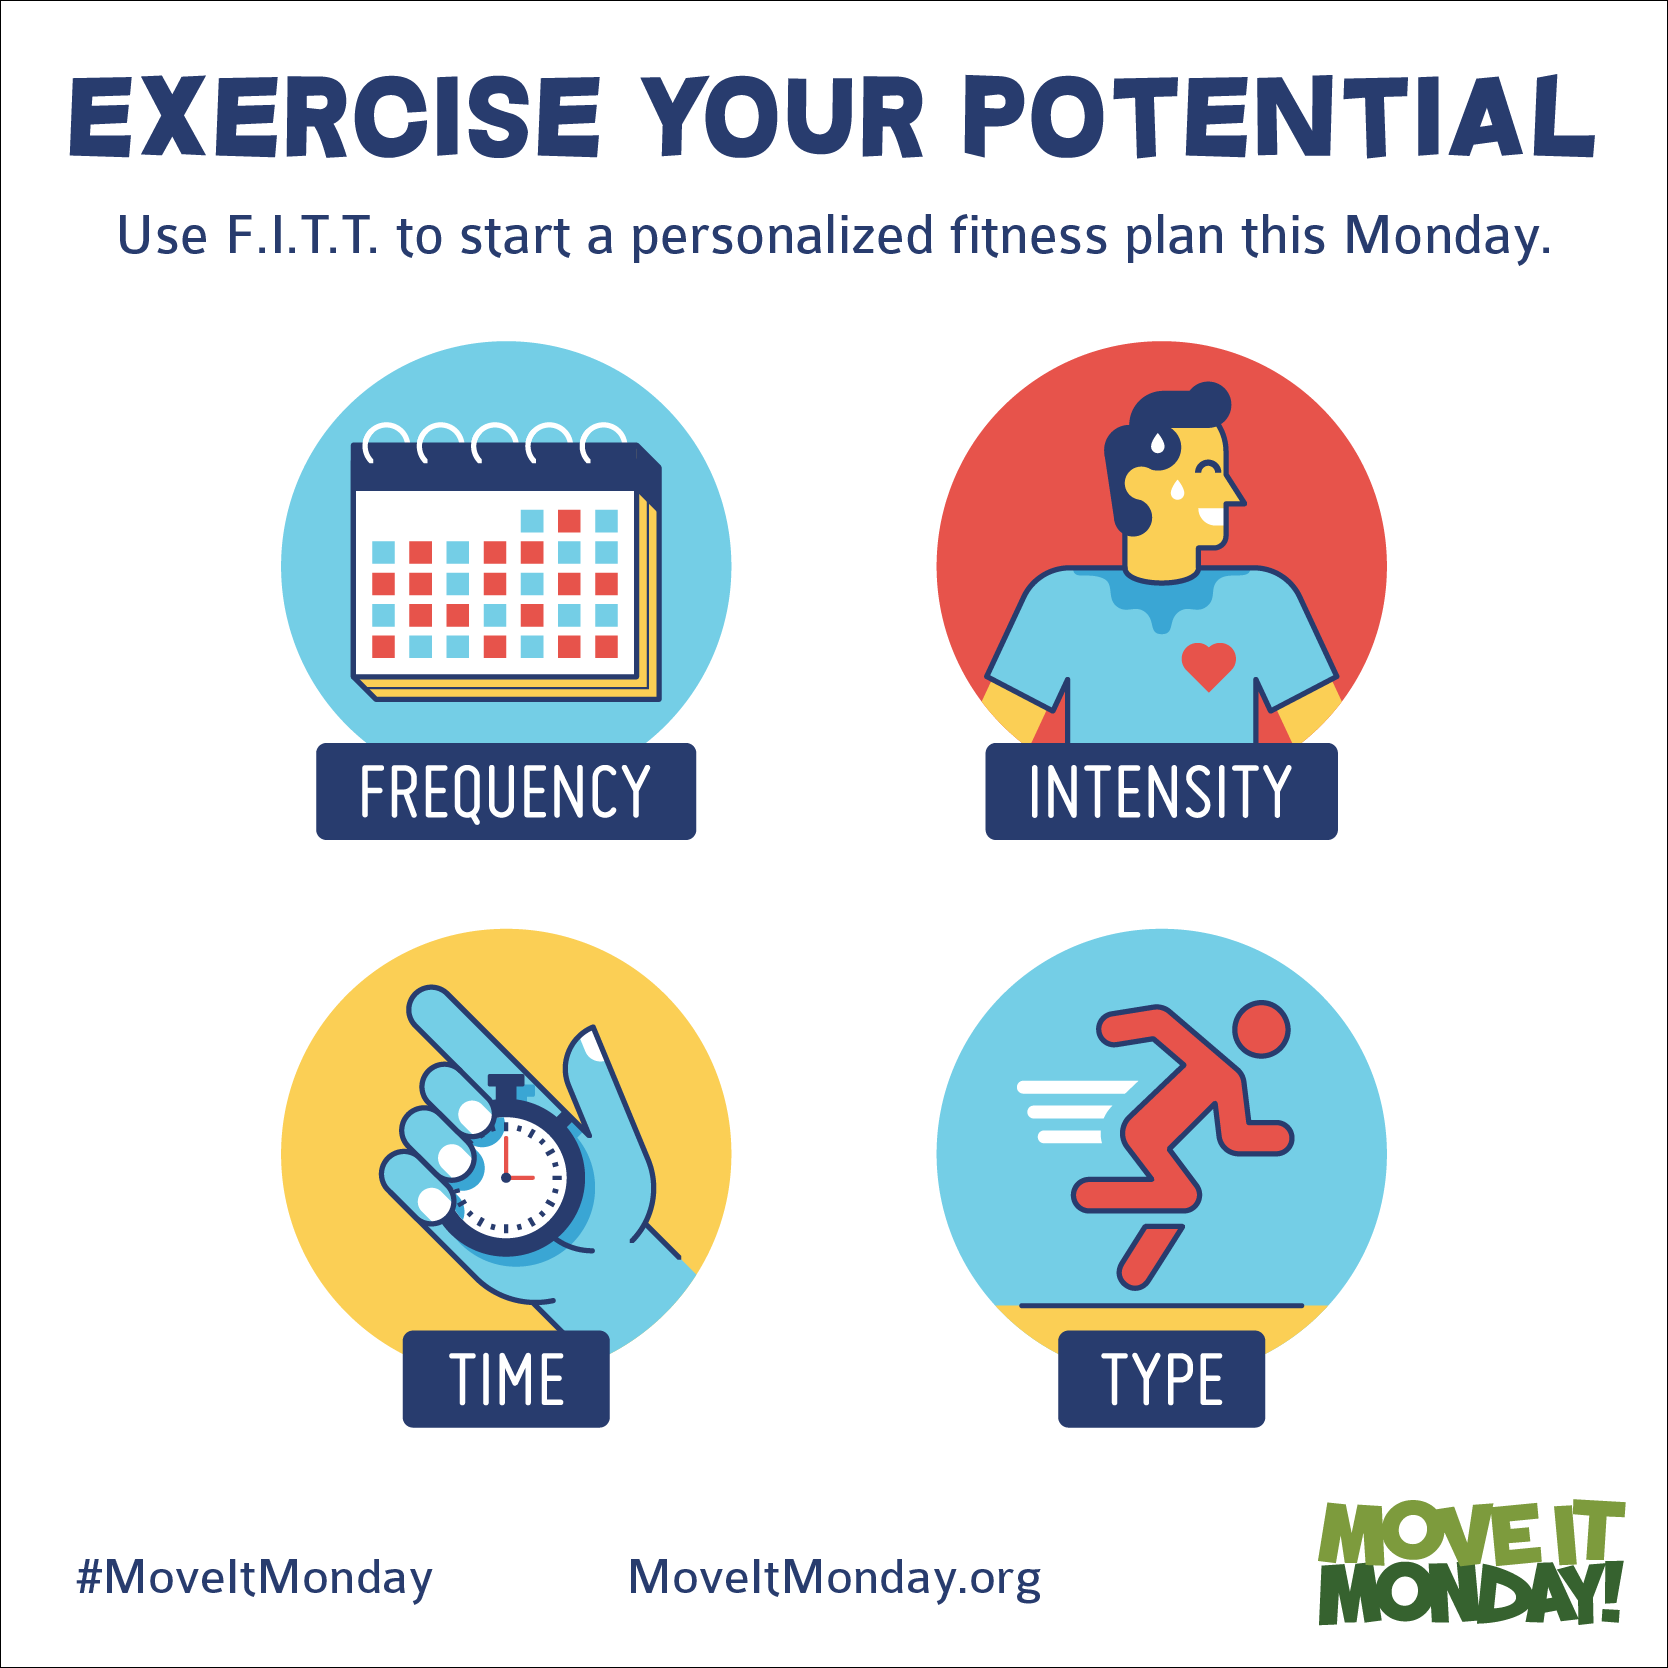 Exercise your potential. Use F.I.T.T. to start a personalized fitness plan this Monday.